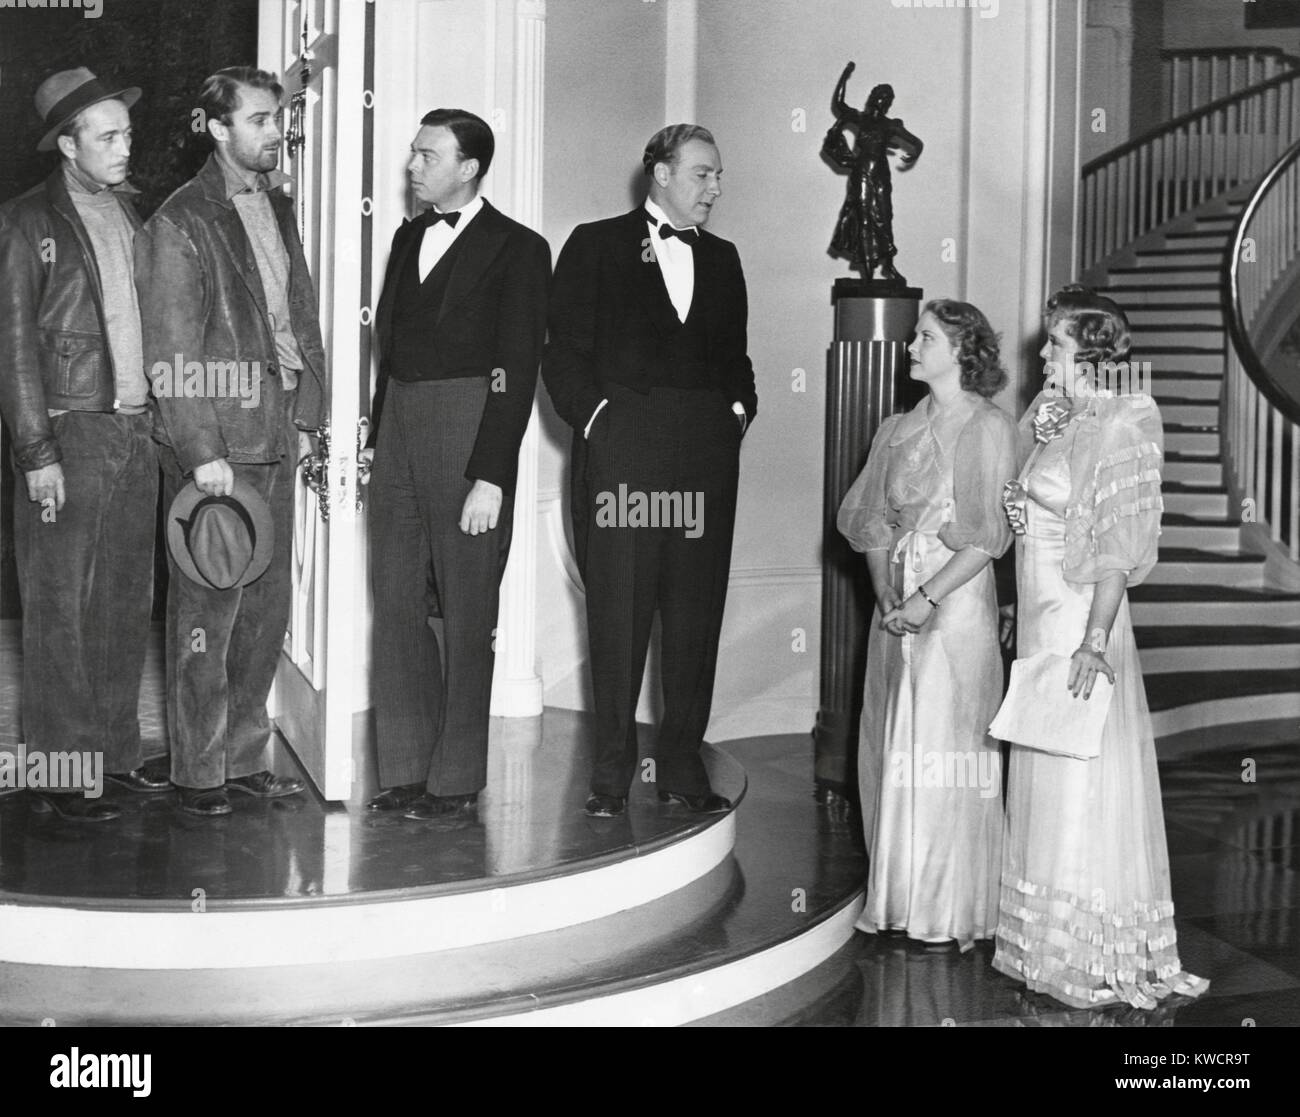 Three Hollywood actors with their Stand-Ins during the production of 'Merrily We Live'. Feb.10, 1938. L-R: George Flynn, Brian Aherne, Bud Carpenter, Alan Mowbray, Georgia Bonafeld, Billie Burke. Stand-ins take the actors place during the lighting of the set and focusing the camera. - (BSLOC 2014 17 73) Stock Photo